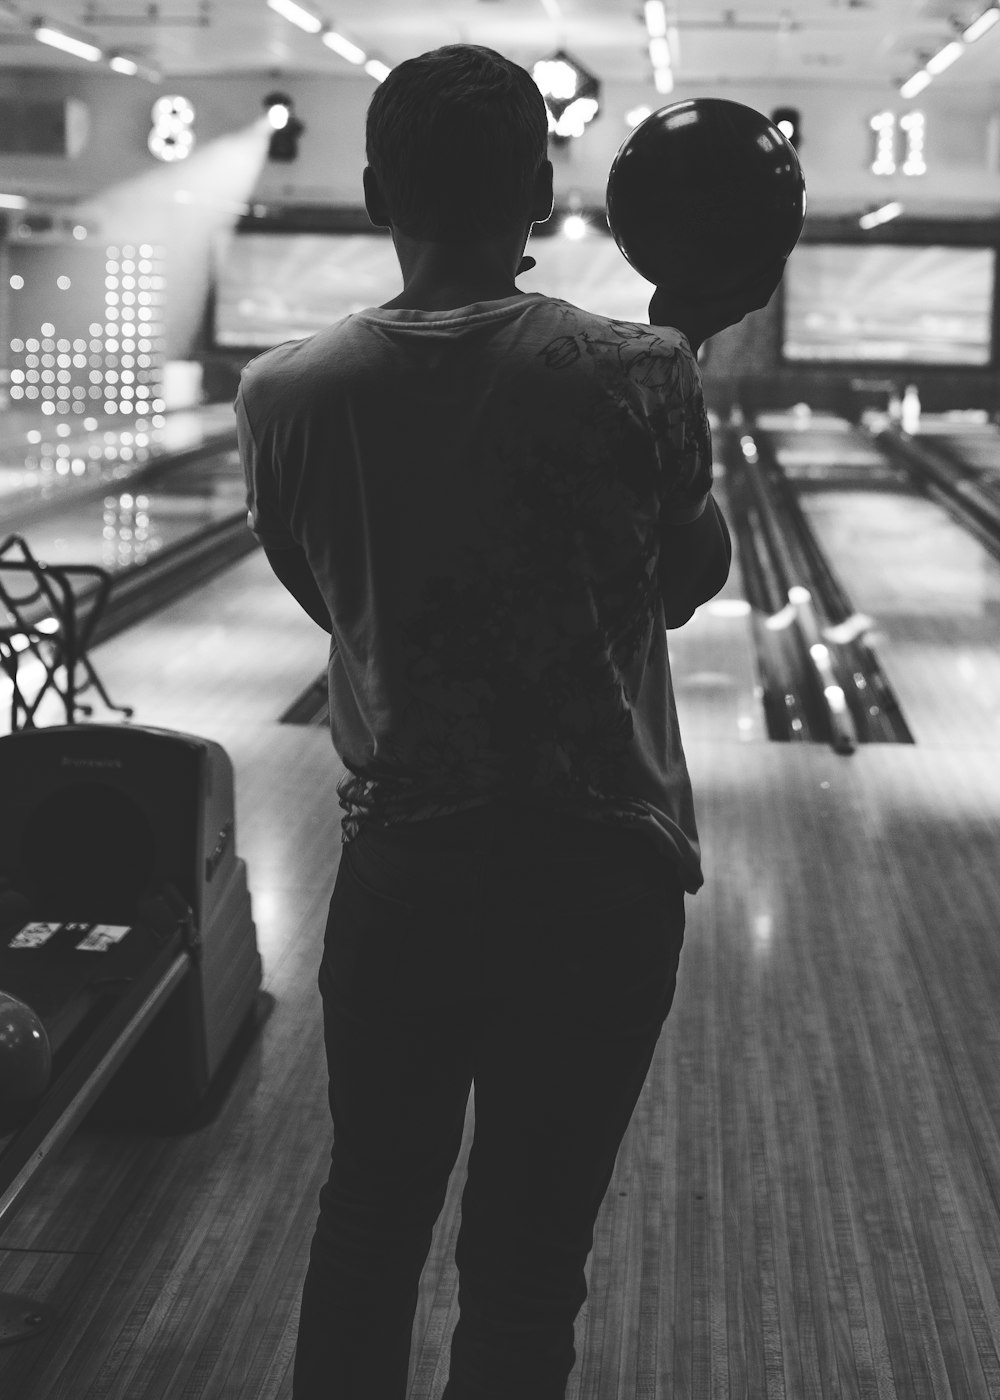 grayscale photo of man holding bowling ball